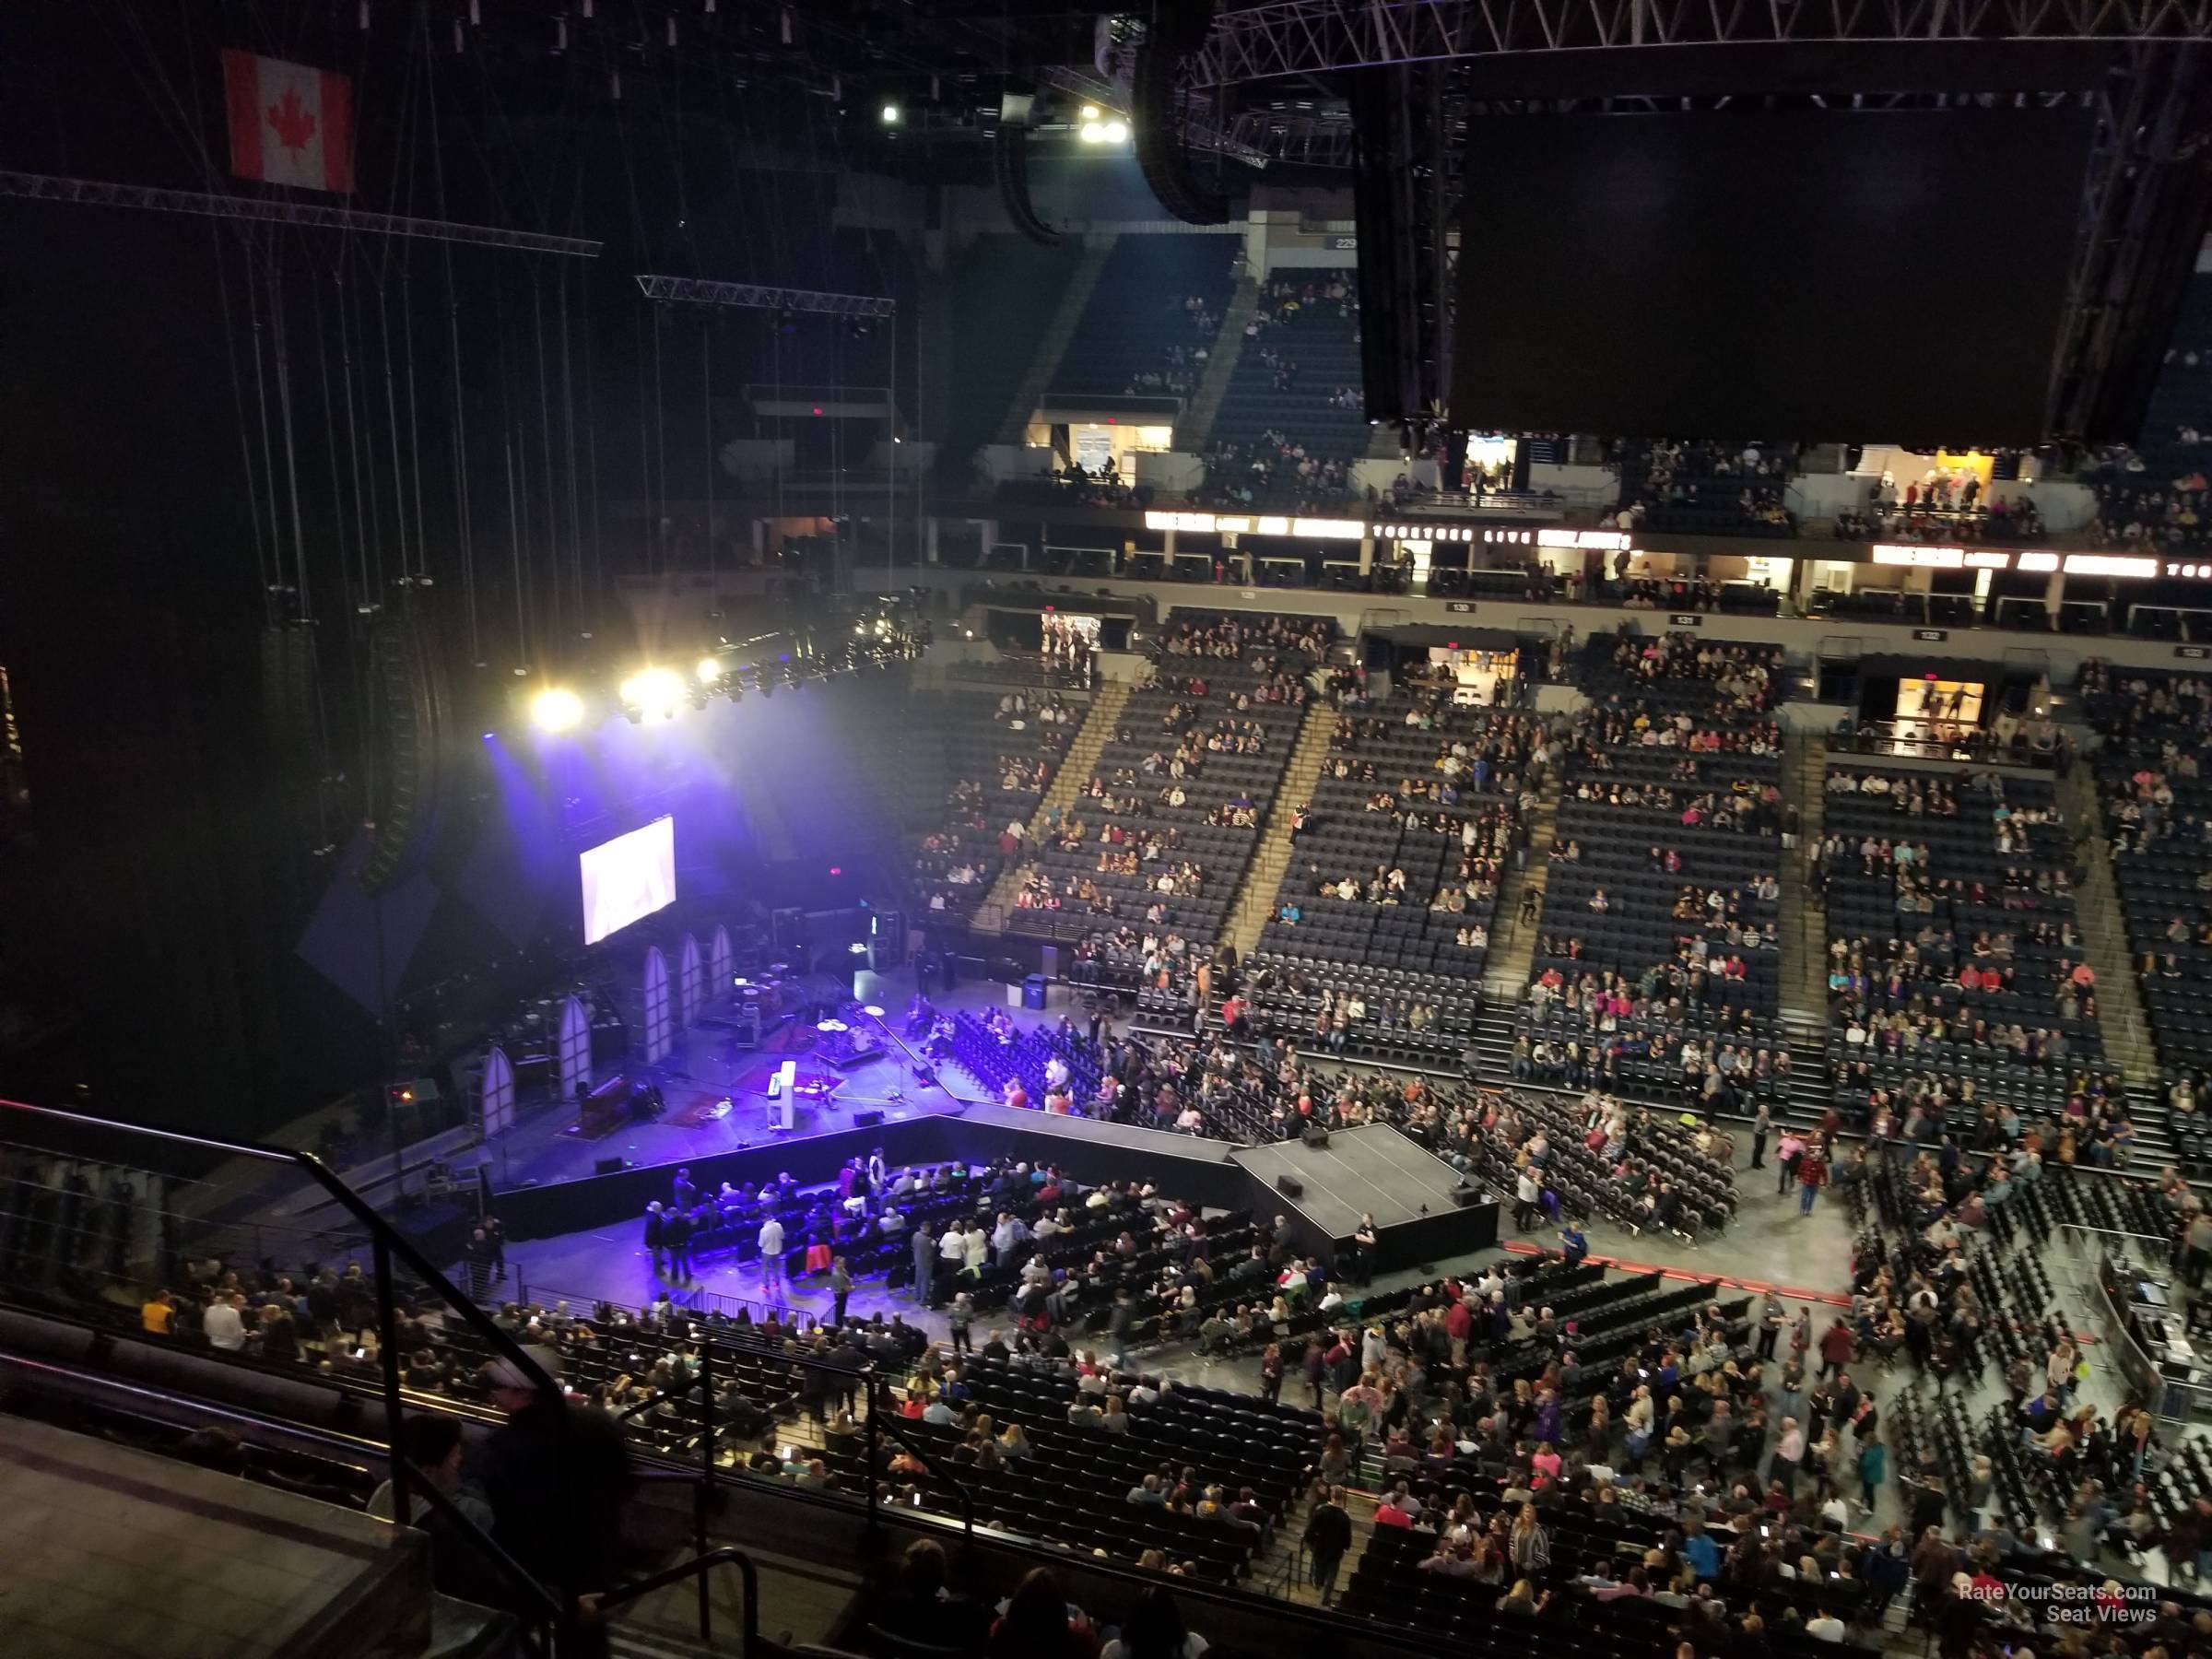 Target Center Section 211 Concert Seating - RateYourSeats.com